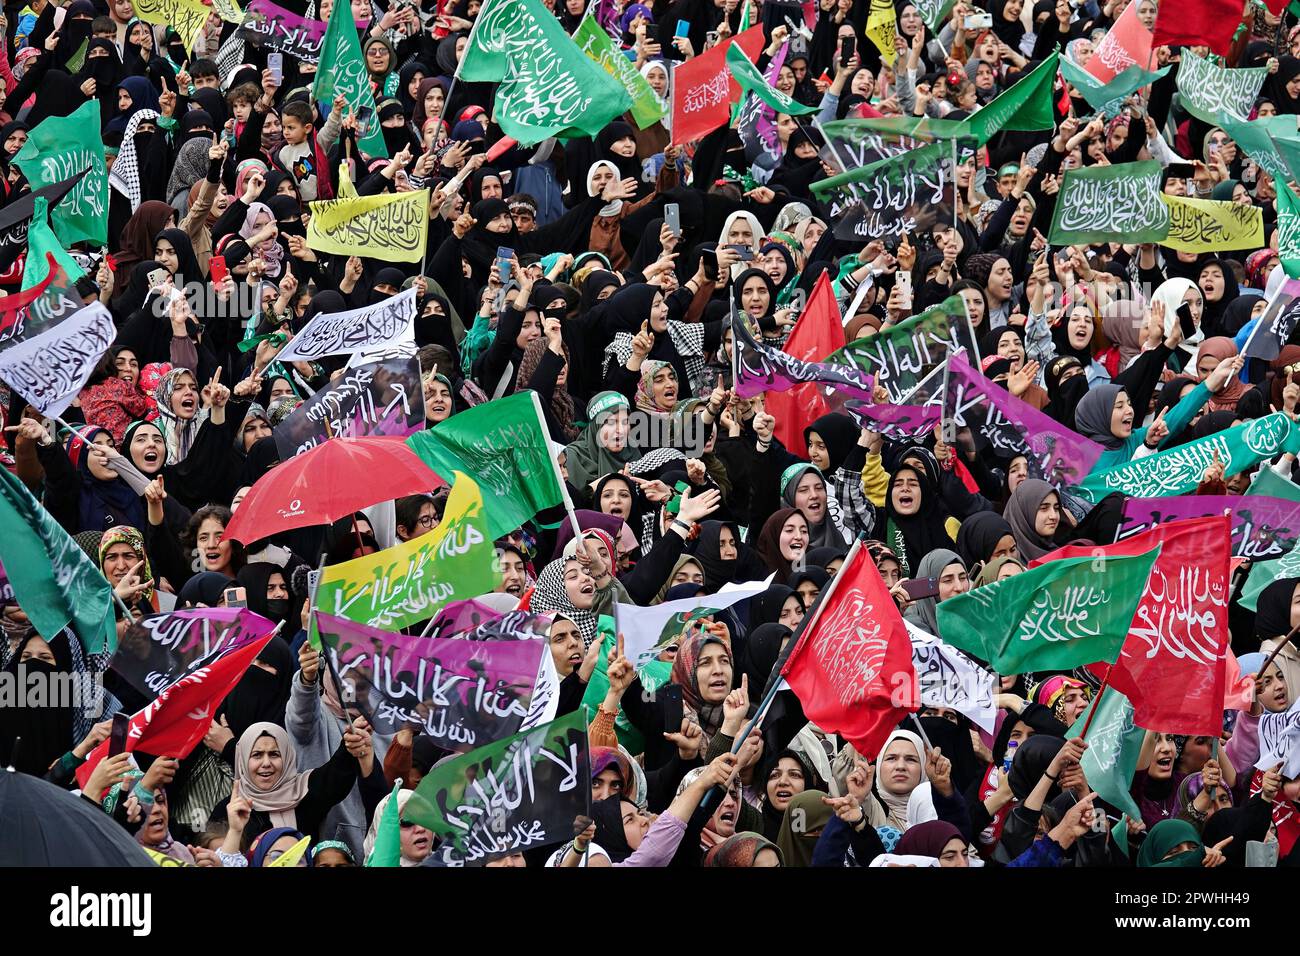 Participants of the birthday event of the Islamic Prophet Muhammad, held at Newroz Park are seen waving flags. The birth of the Islamic Prophet Muhammad was celebrated with an event organized by the Prophet Lovers Foundation in Newroz square in Diyarbakir and attended by thousands of people. Zekeriya Yapicioglu, the Chairman of the Islamic Kurdish party Free Cause Party (HUDA-PAR), as well as representatives of many parties and organizations from different Muslim countries, especially the representative of the Hamas organization from Palestine, also attended the celebration. (Photo by Mehmet M Stock Photo